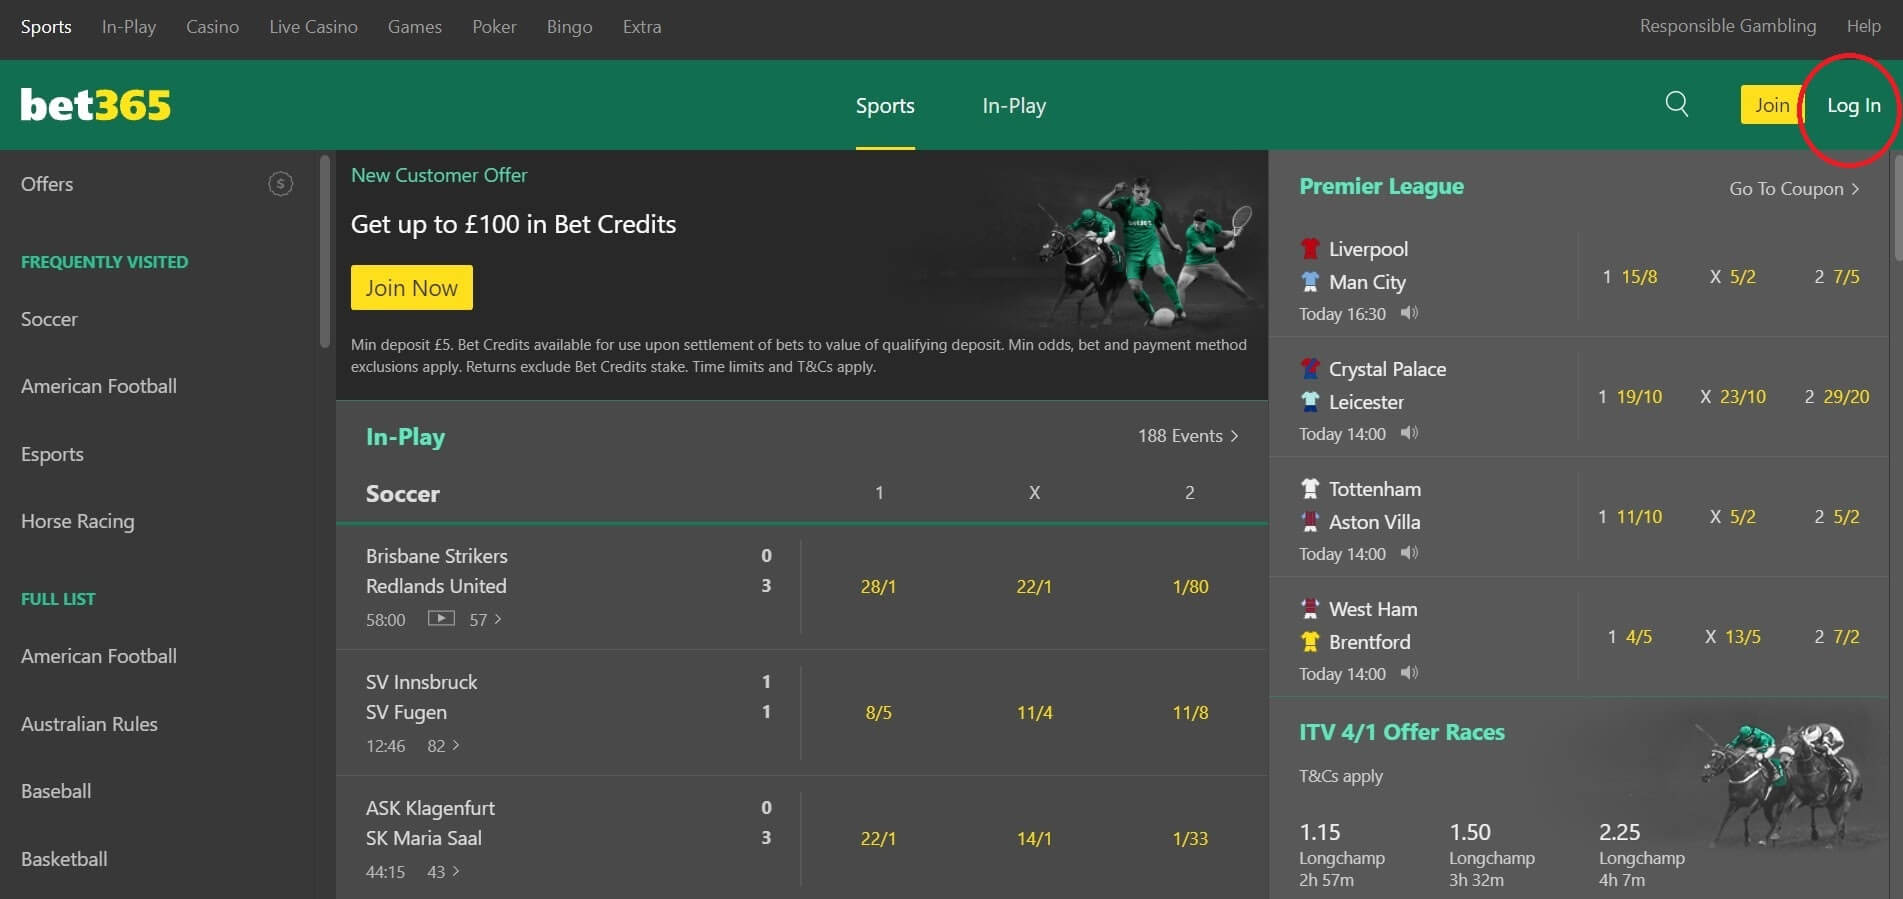 How To Bet on Bet365: Beginner Step by Step Guide -